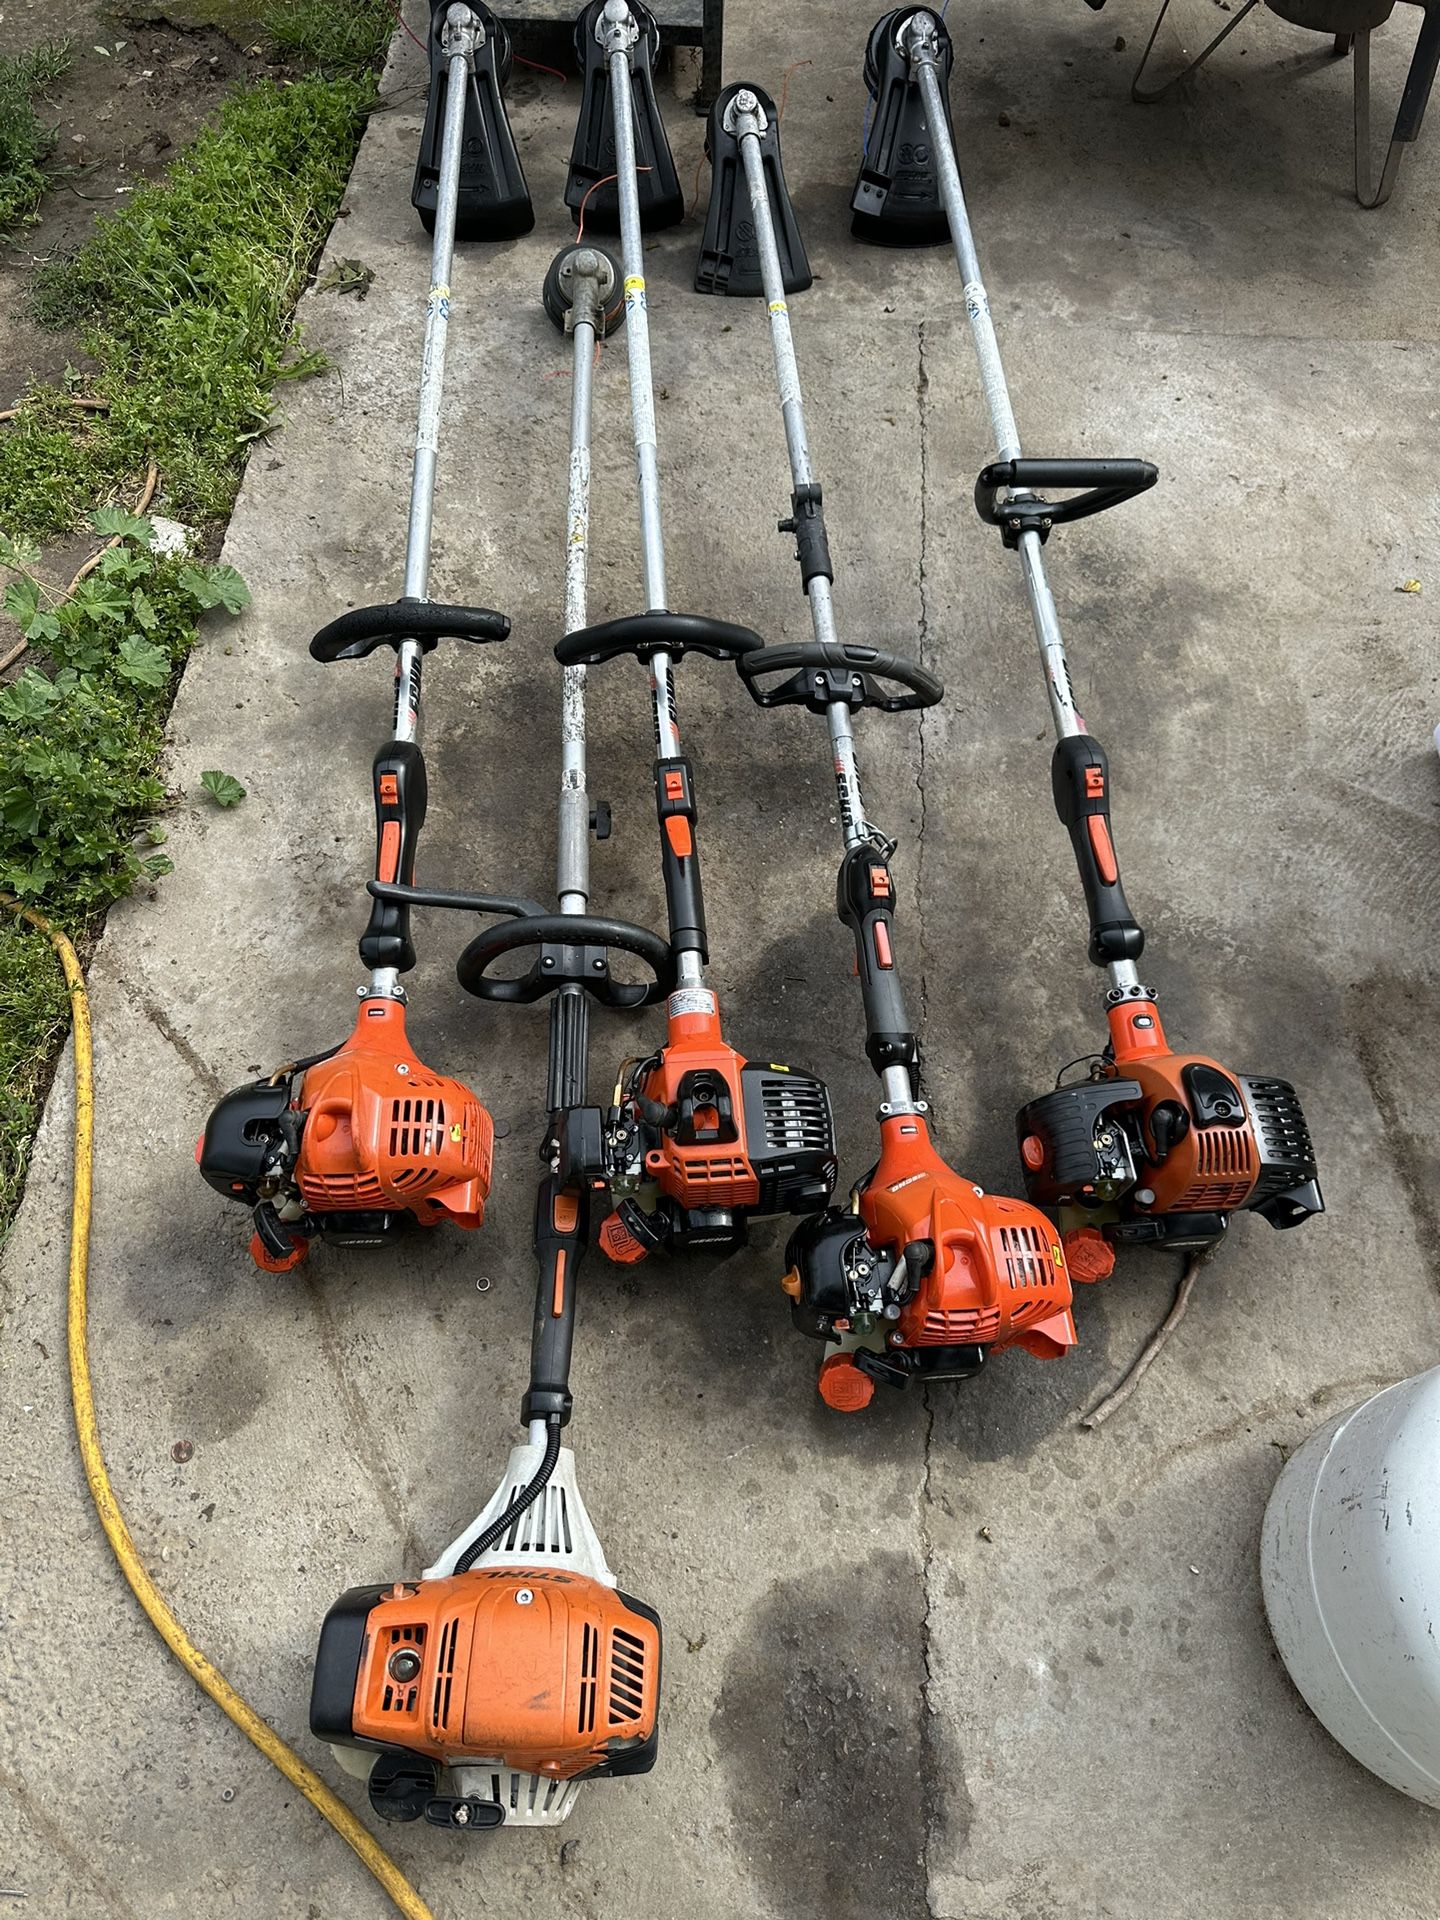 Weed Eaters Echos For Sale 200.00 The Stihl For 275